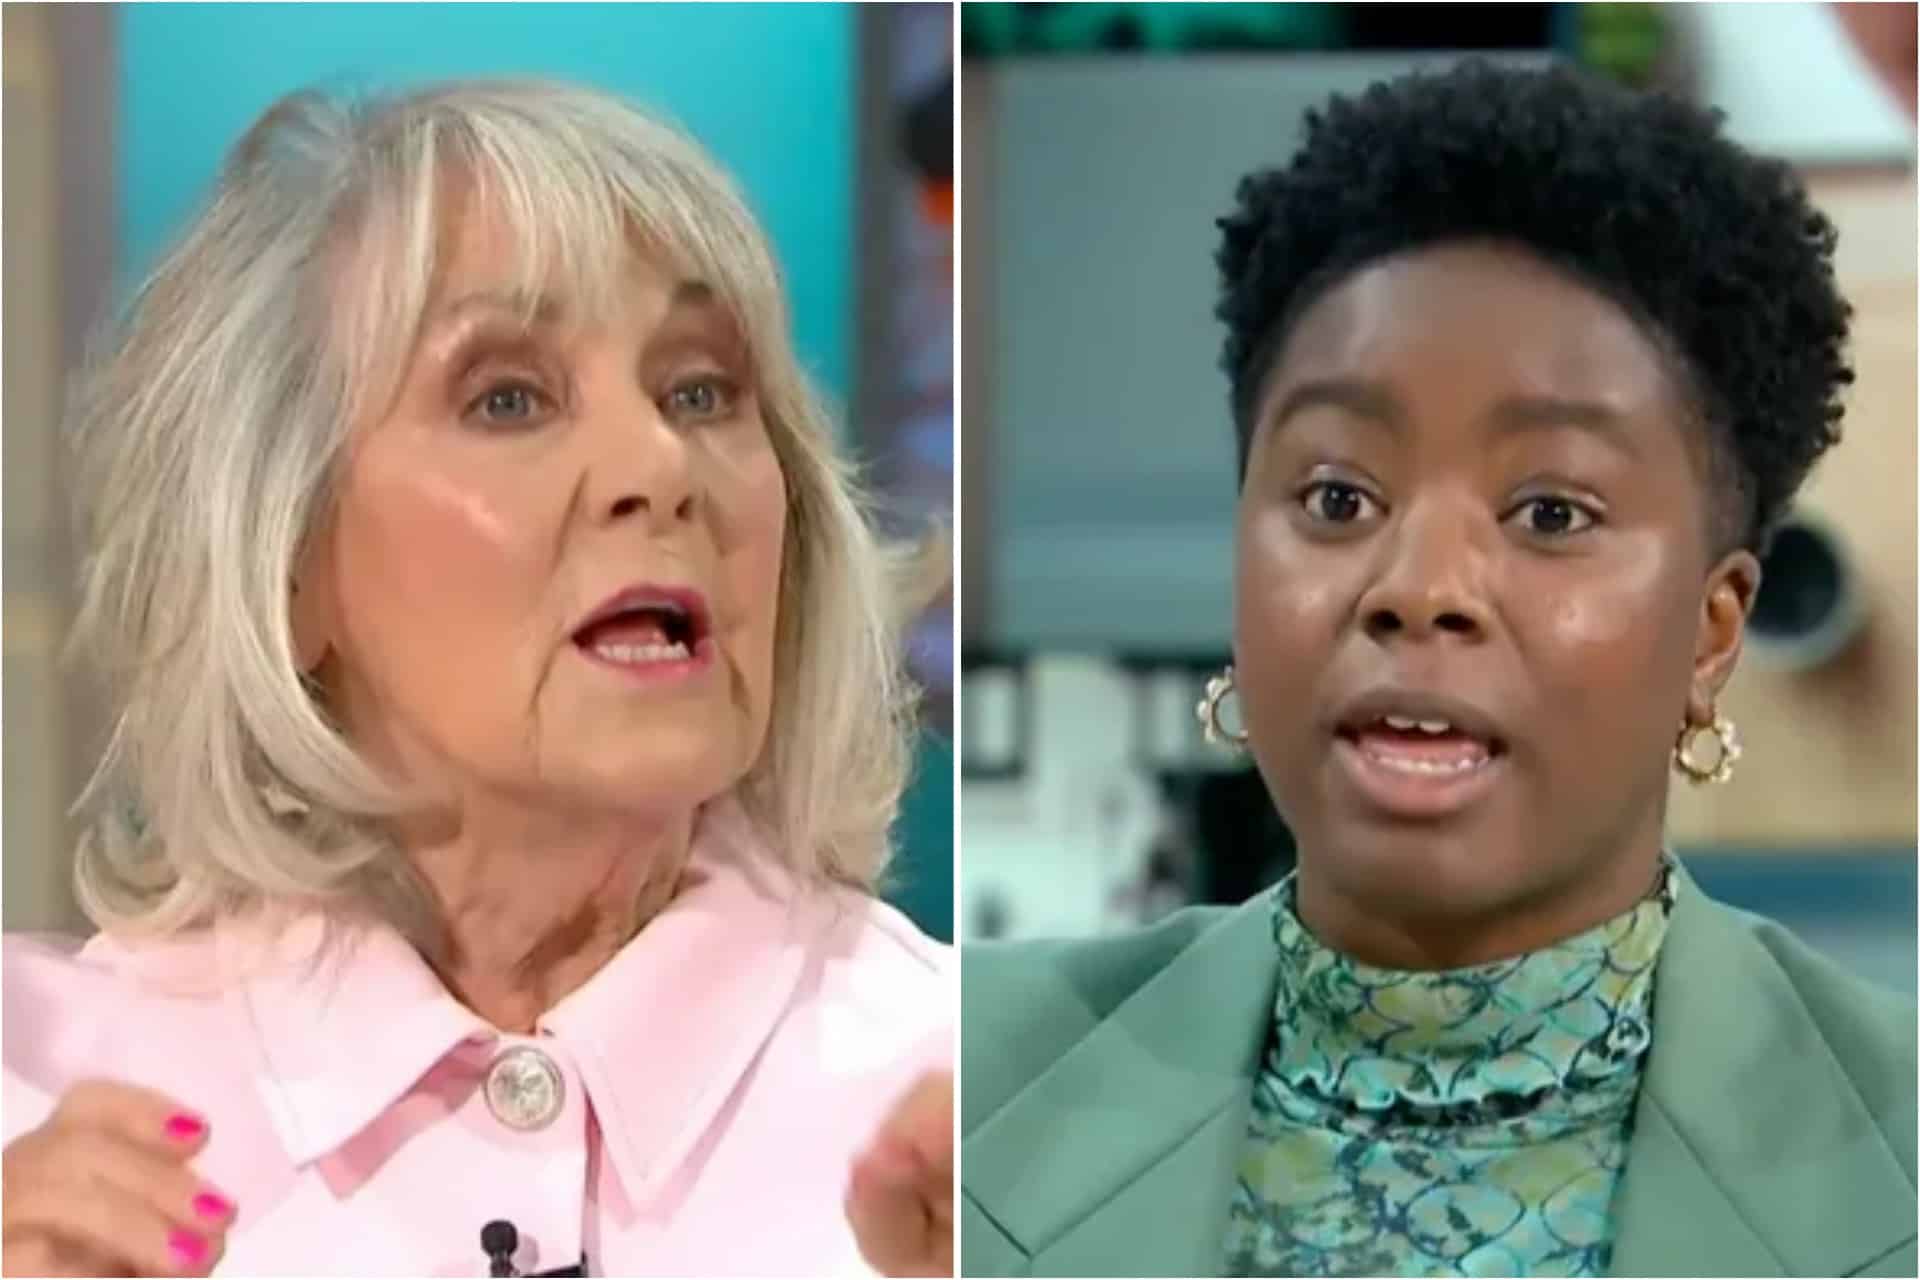 Good Morning Britain debate explodes over whether Gen Z are ‘lazy workers’